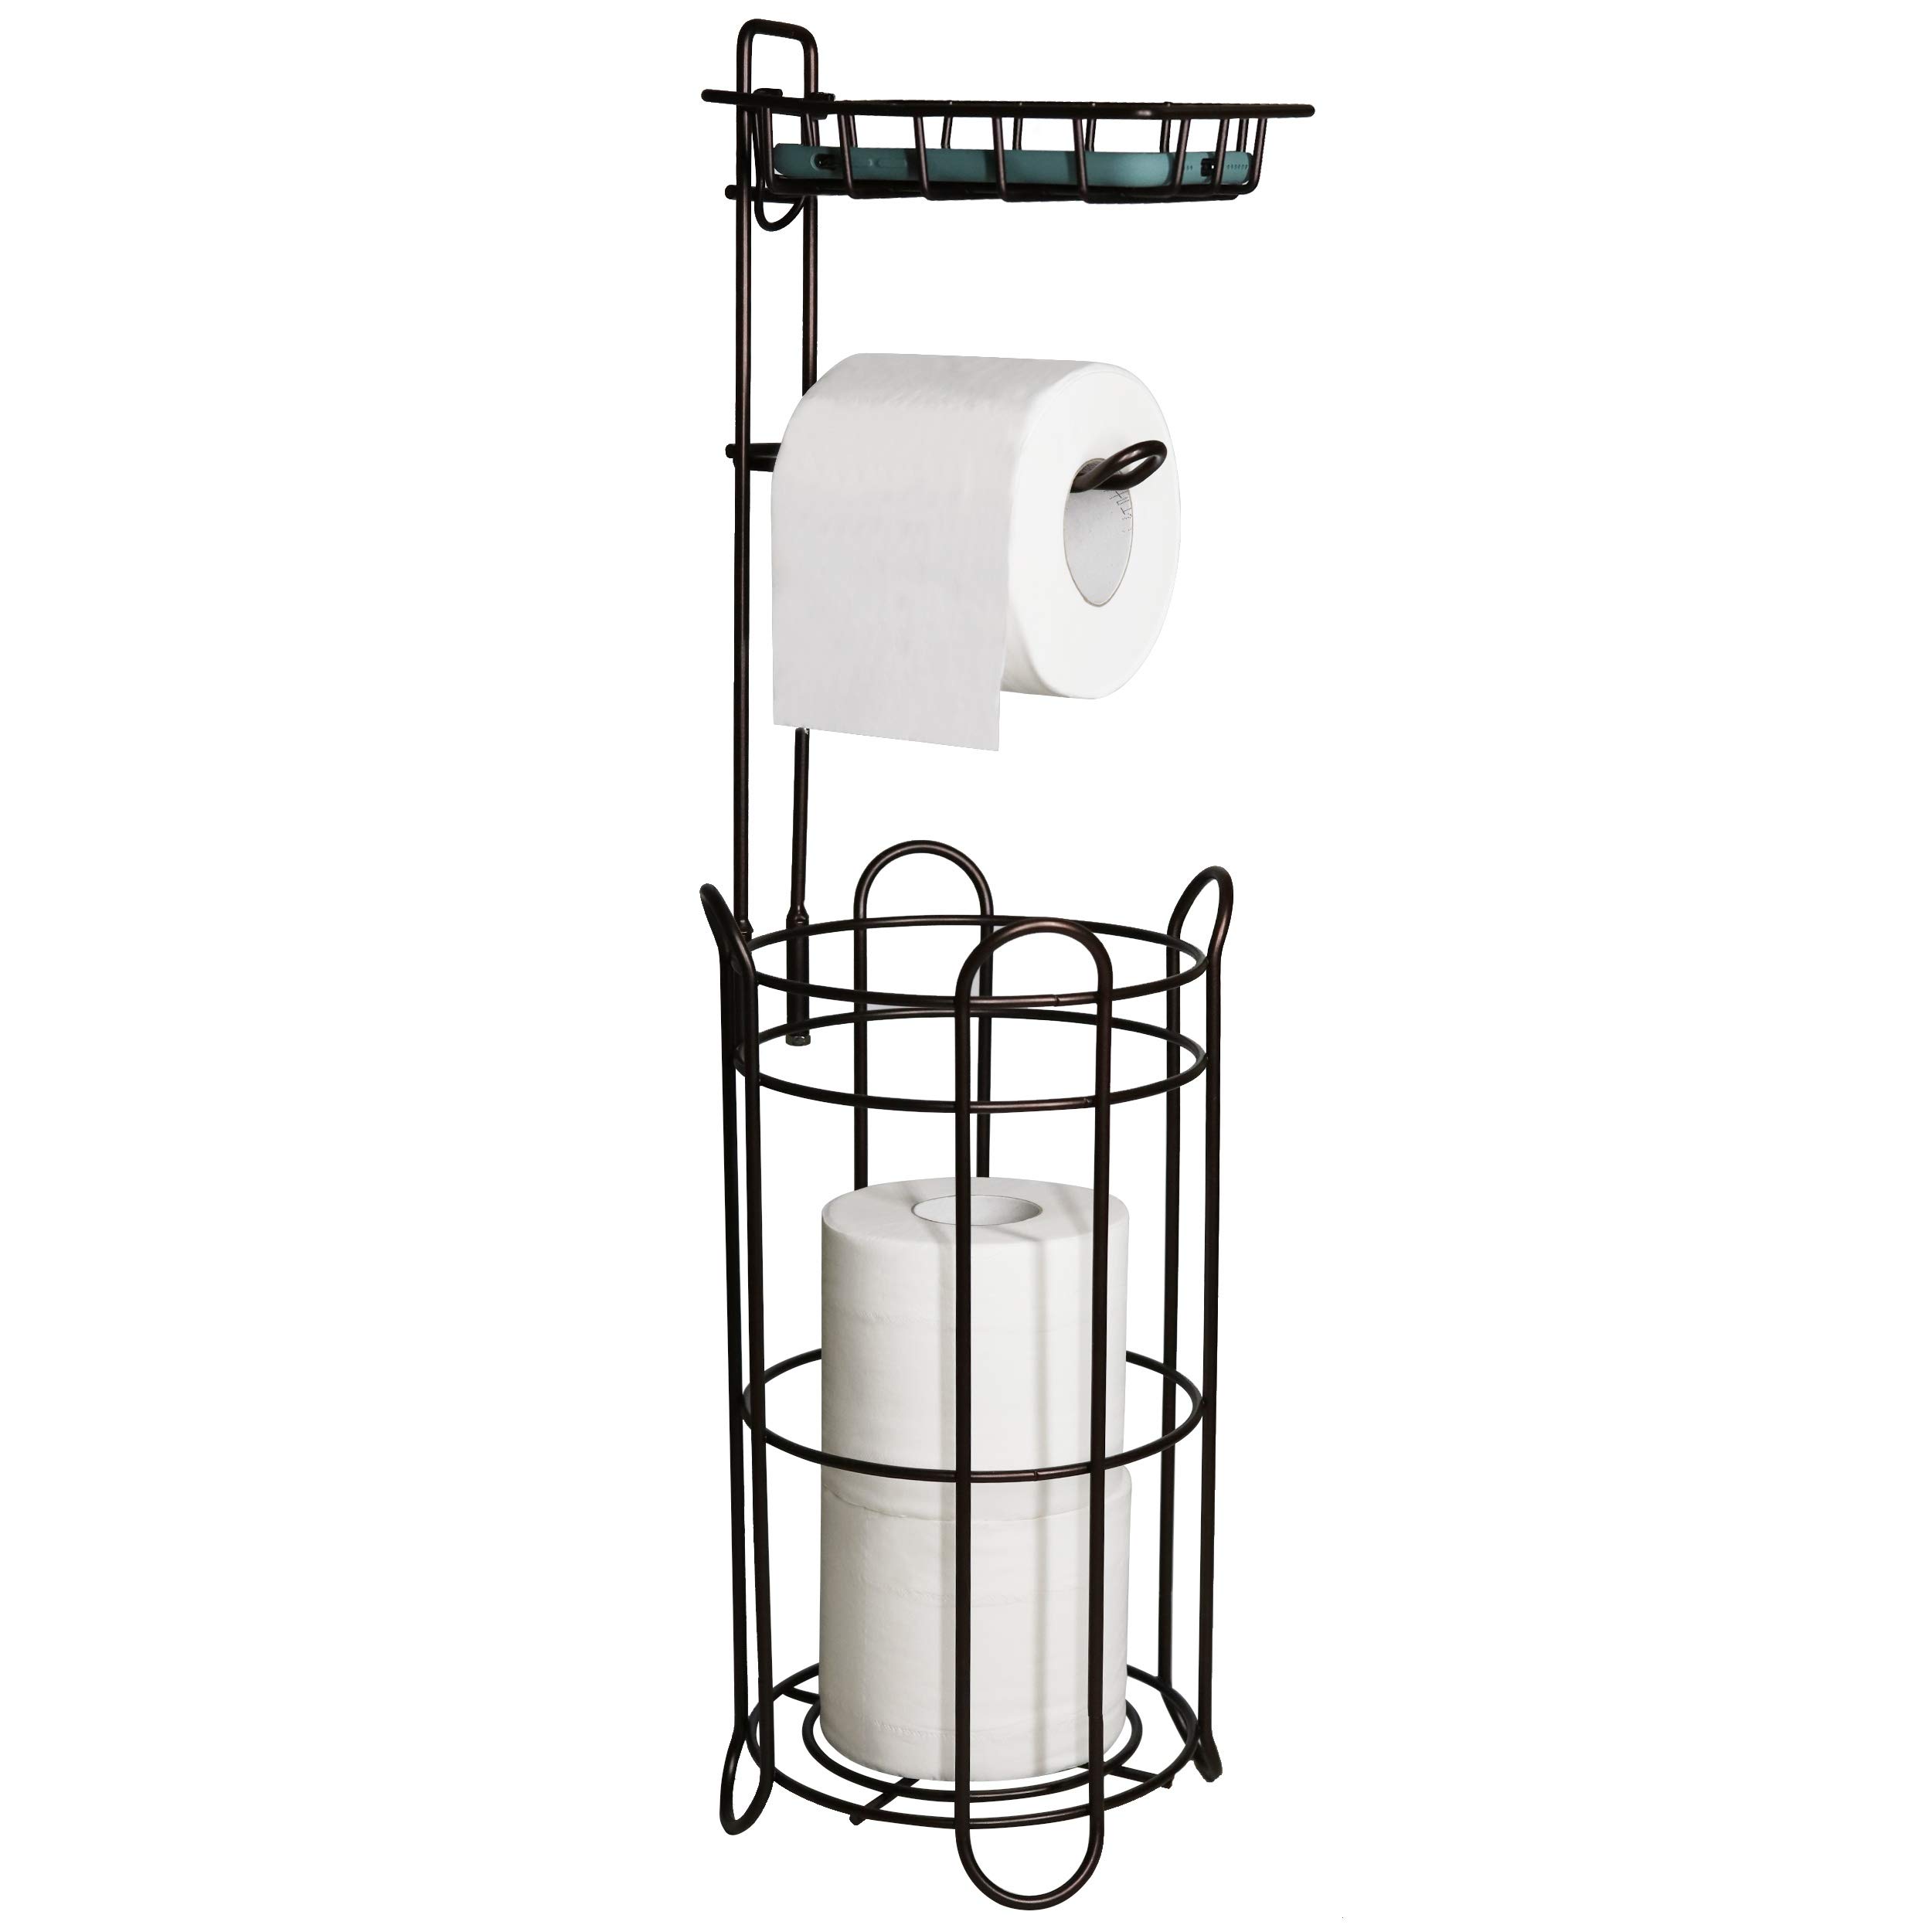 FORUP Freestanding Metal Toilet Paper Roll Holder Stand and Dispenser